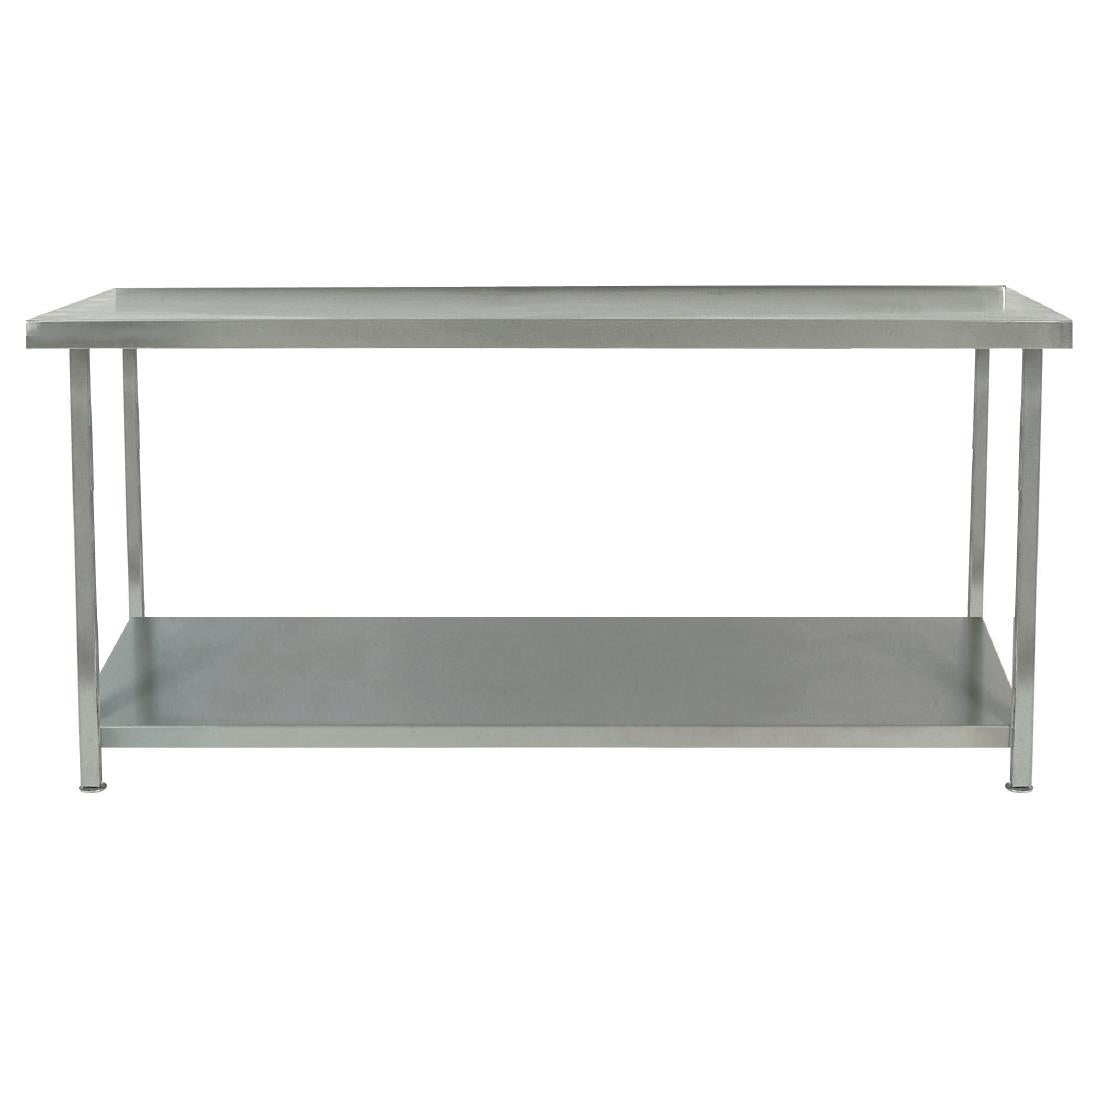 Parry Fully Welded Stainless Steel Centre Table with Undershelf 1500x700mm